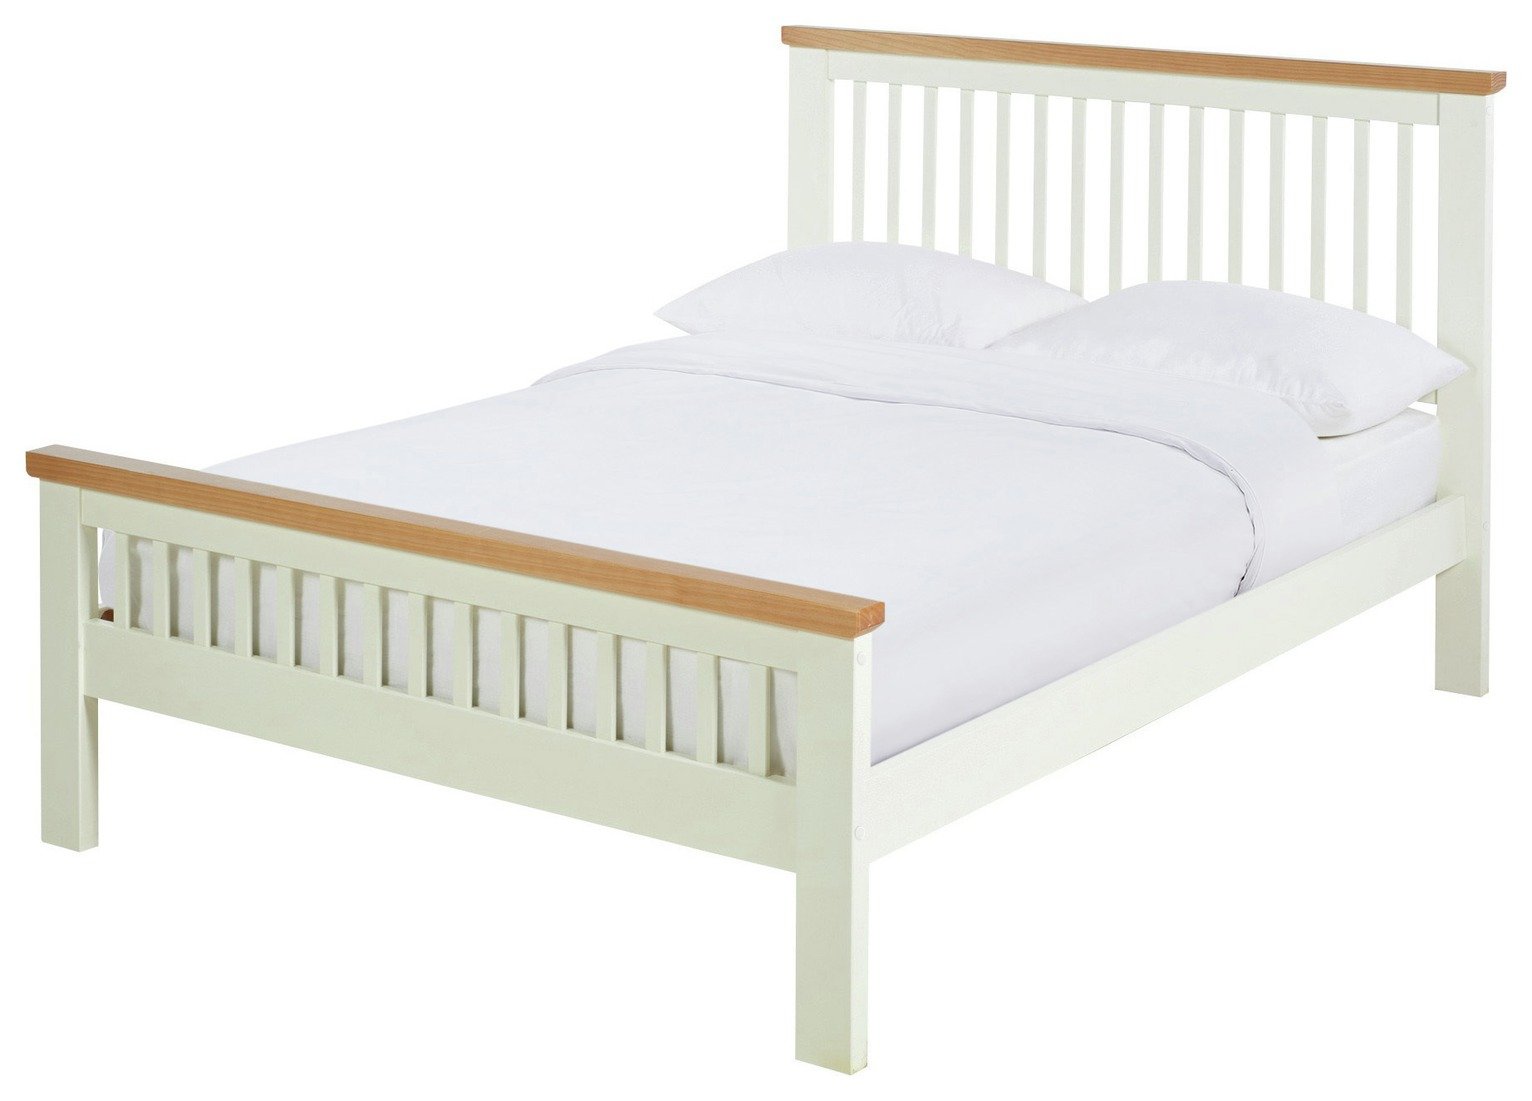 Argos Home Aubrey Kingsize Wooden Bed Frame - Two Tone